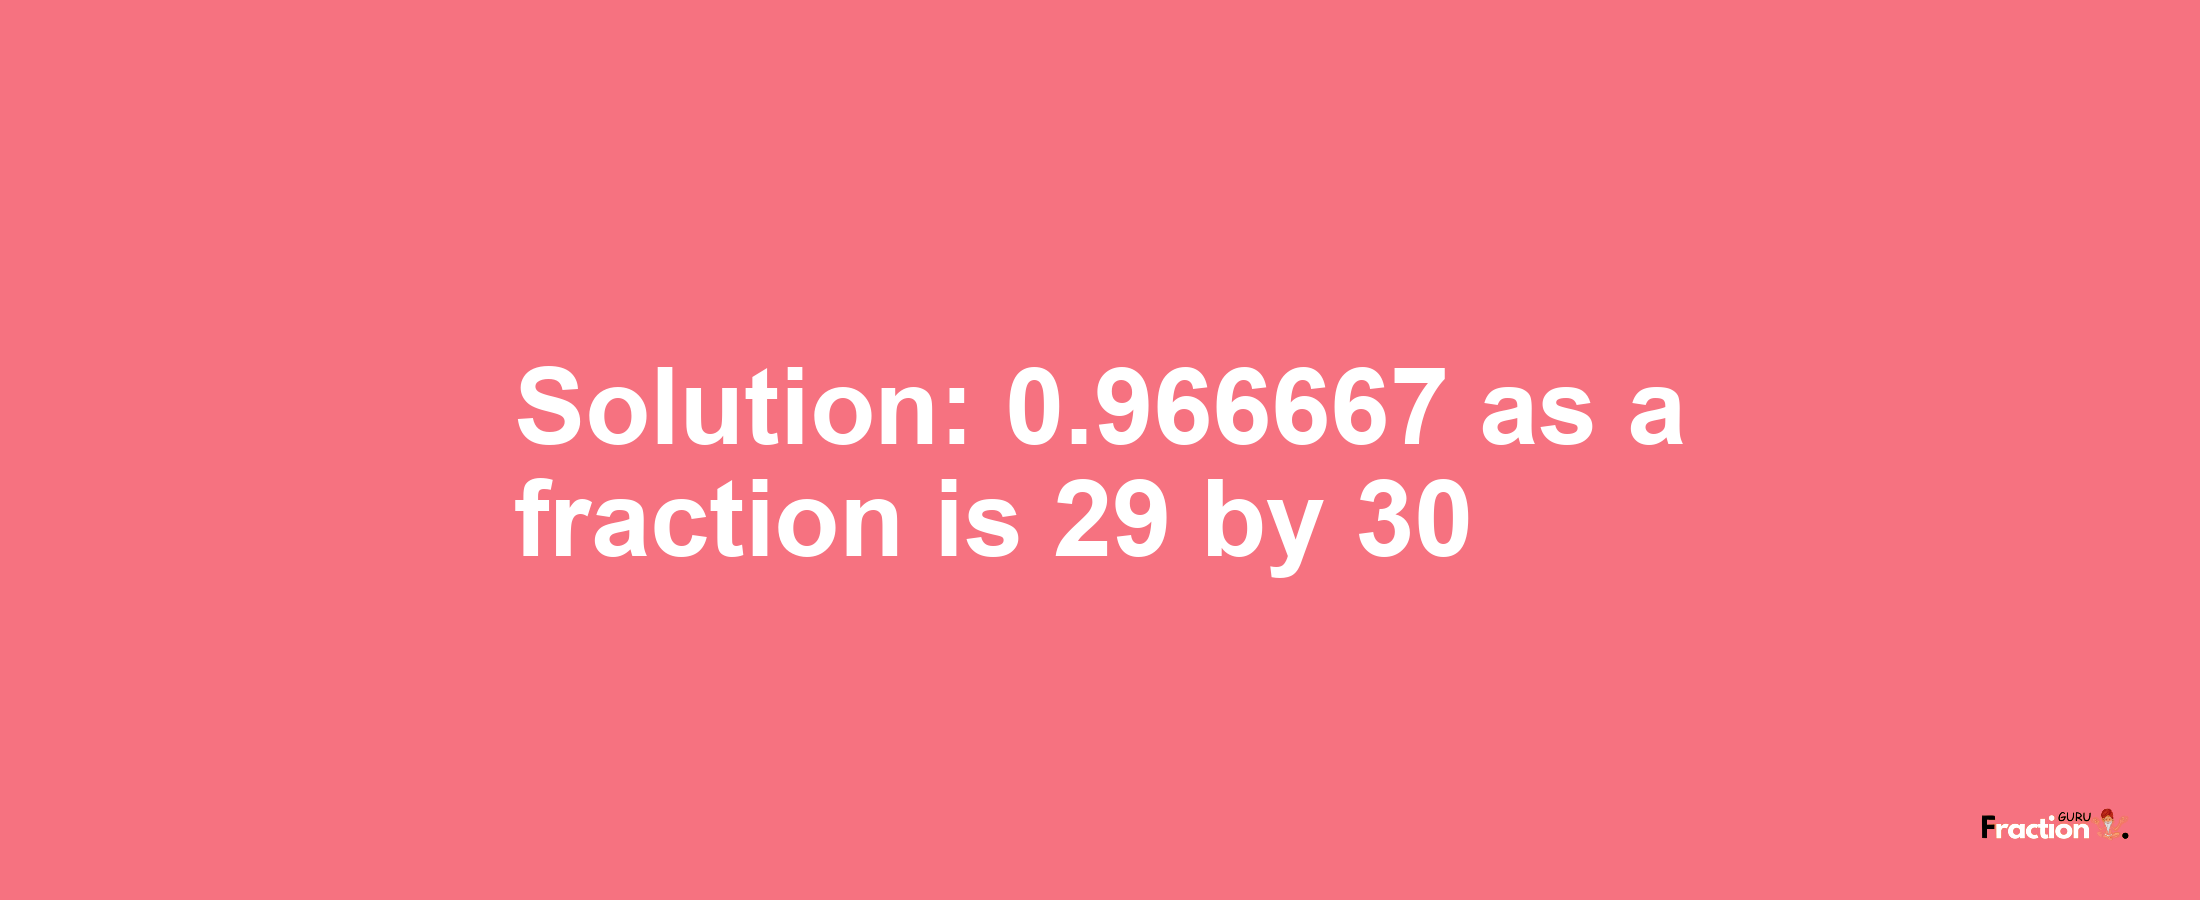 Solution:0.966667 as a fraction is 29/30